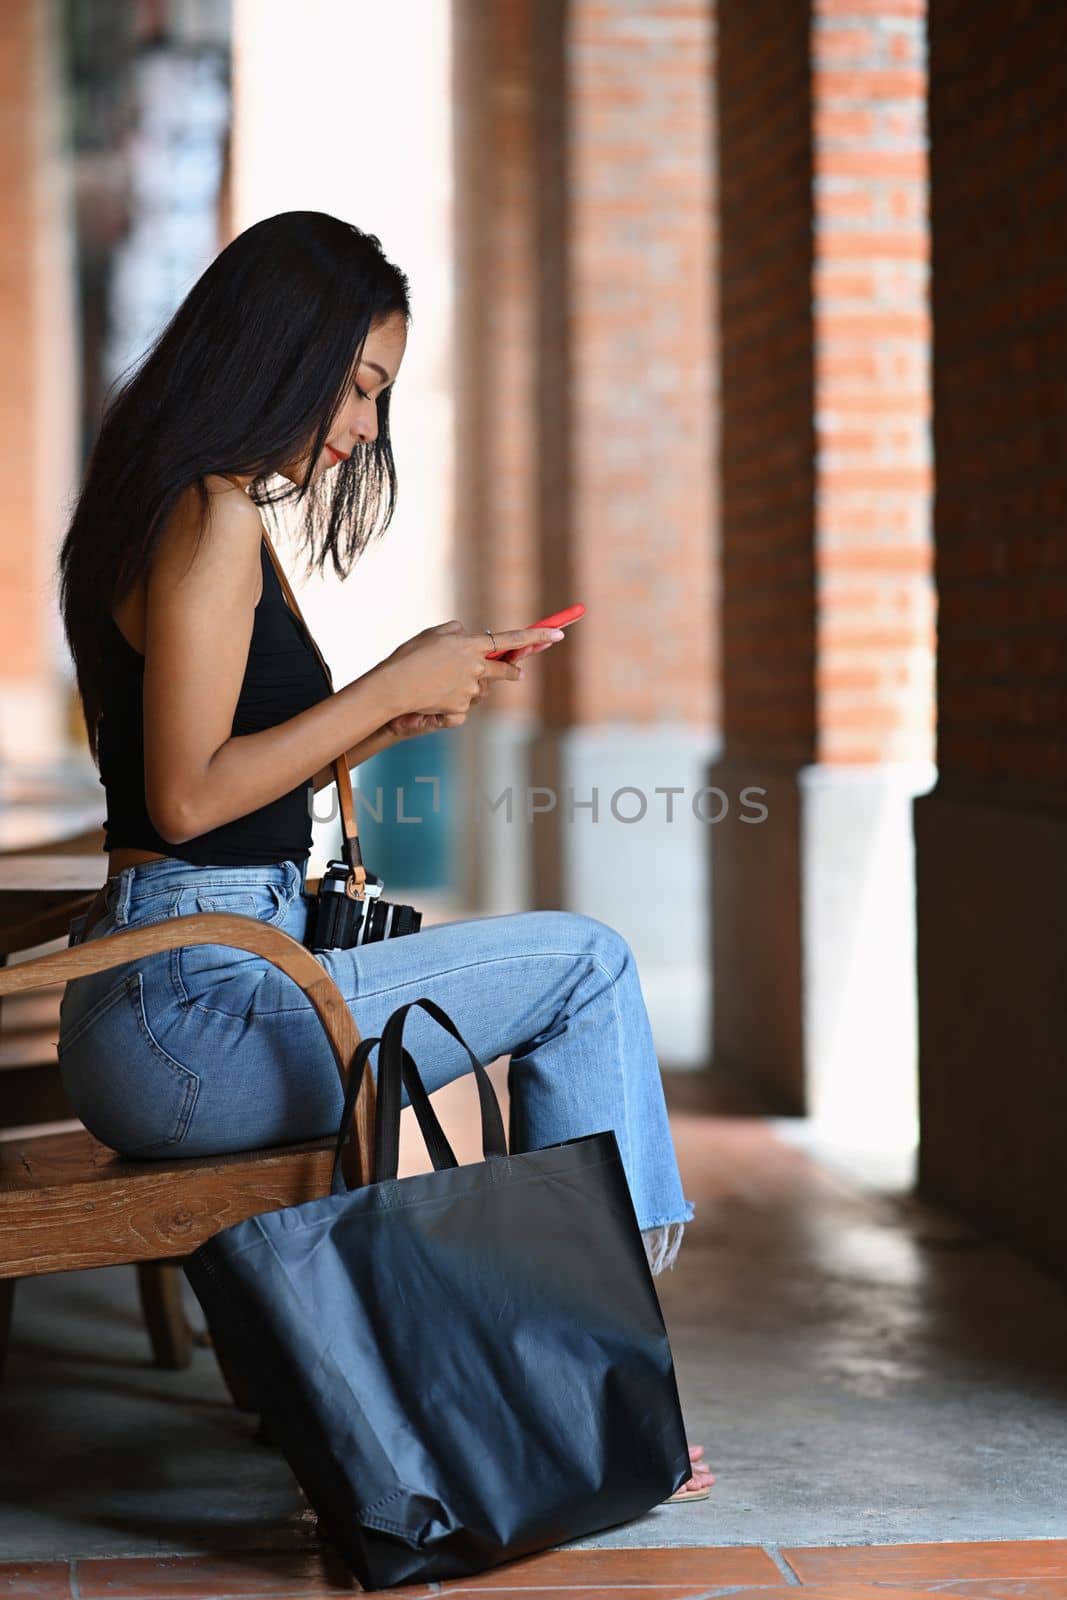 Full length portrait of beautiful woman sitting on bench and using smart phone.